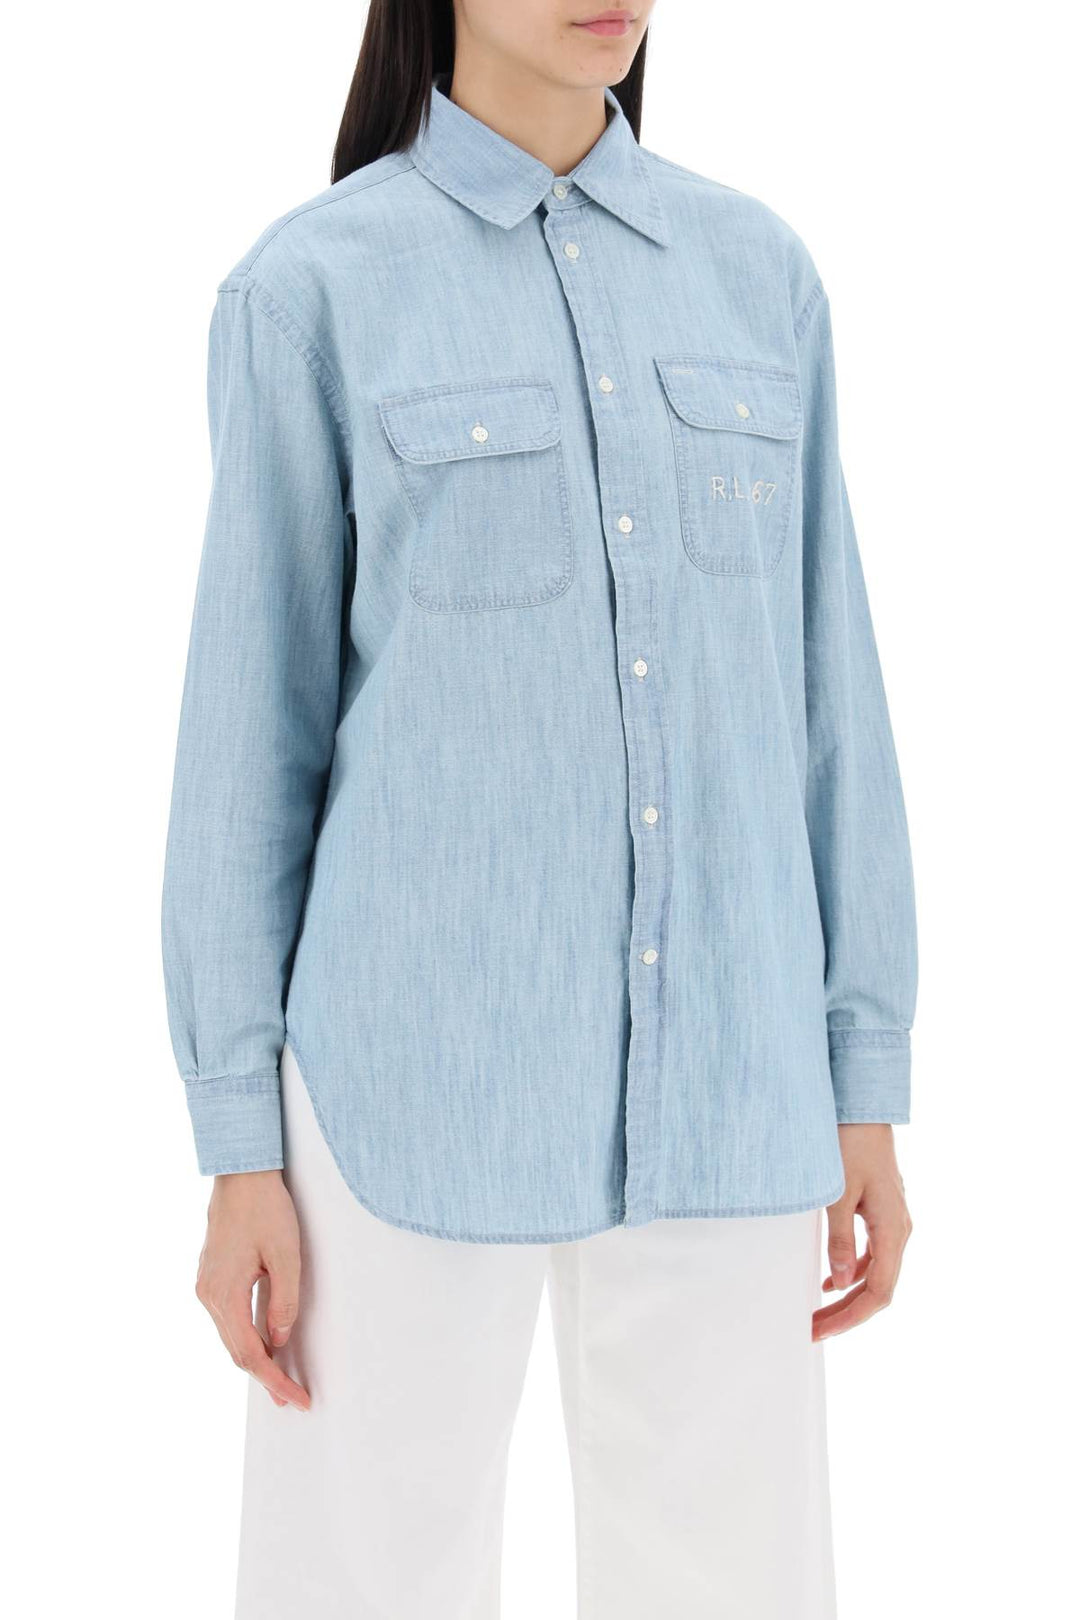 Polo Ralph Lauren Embroidered Chambray   Light Blue